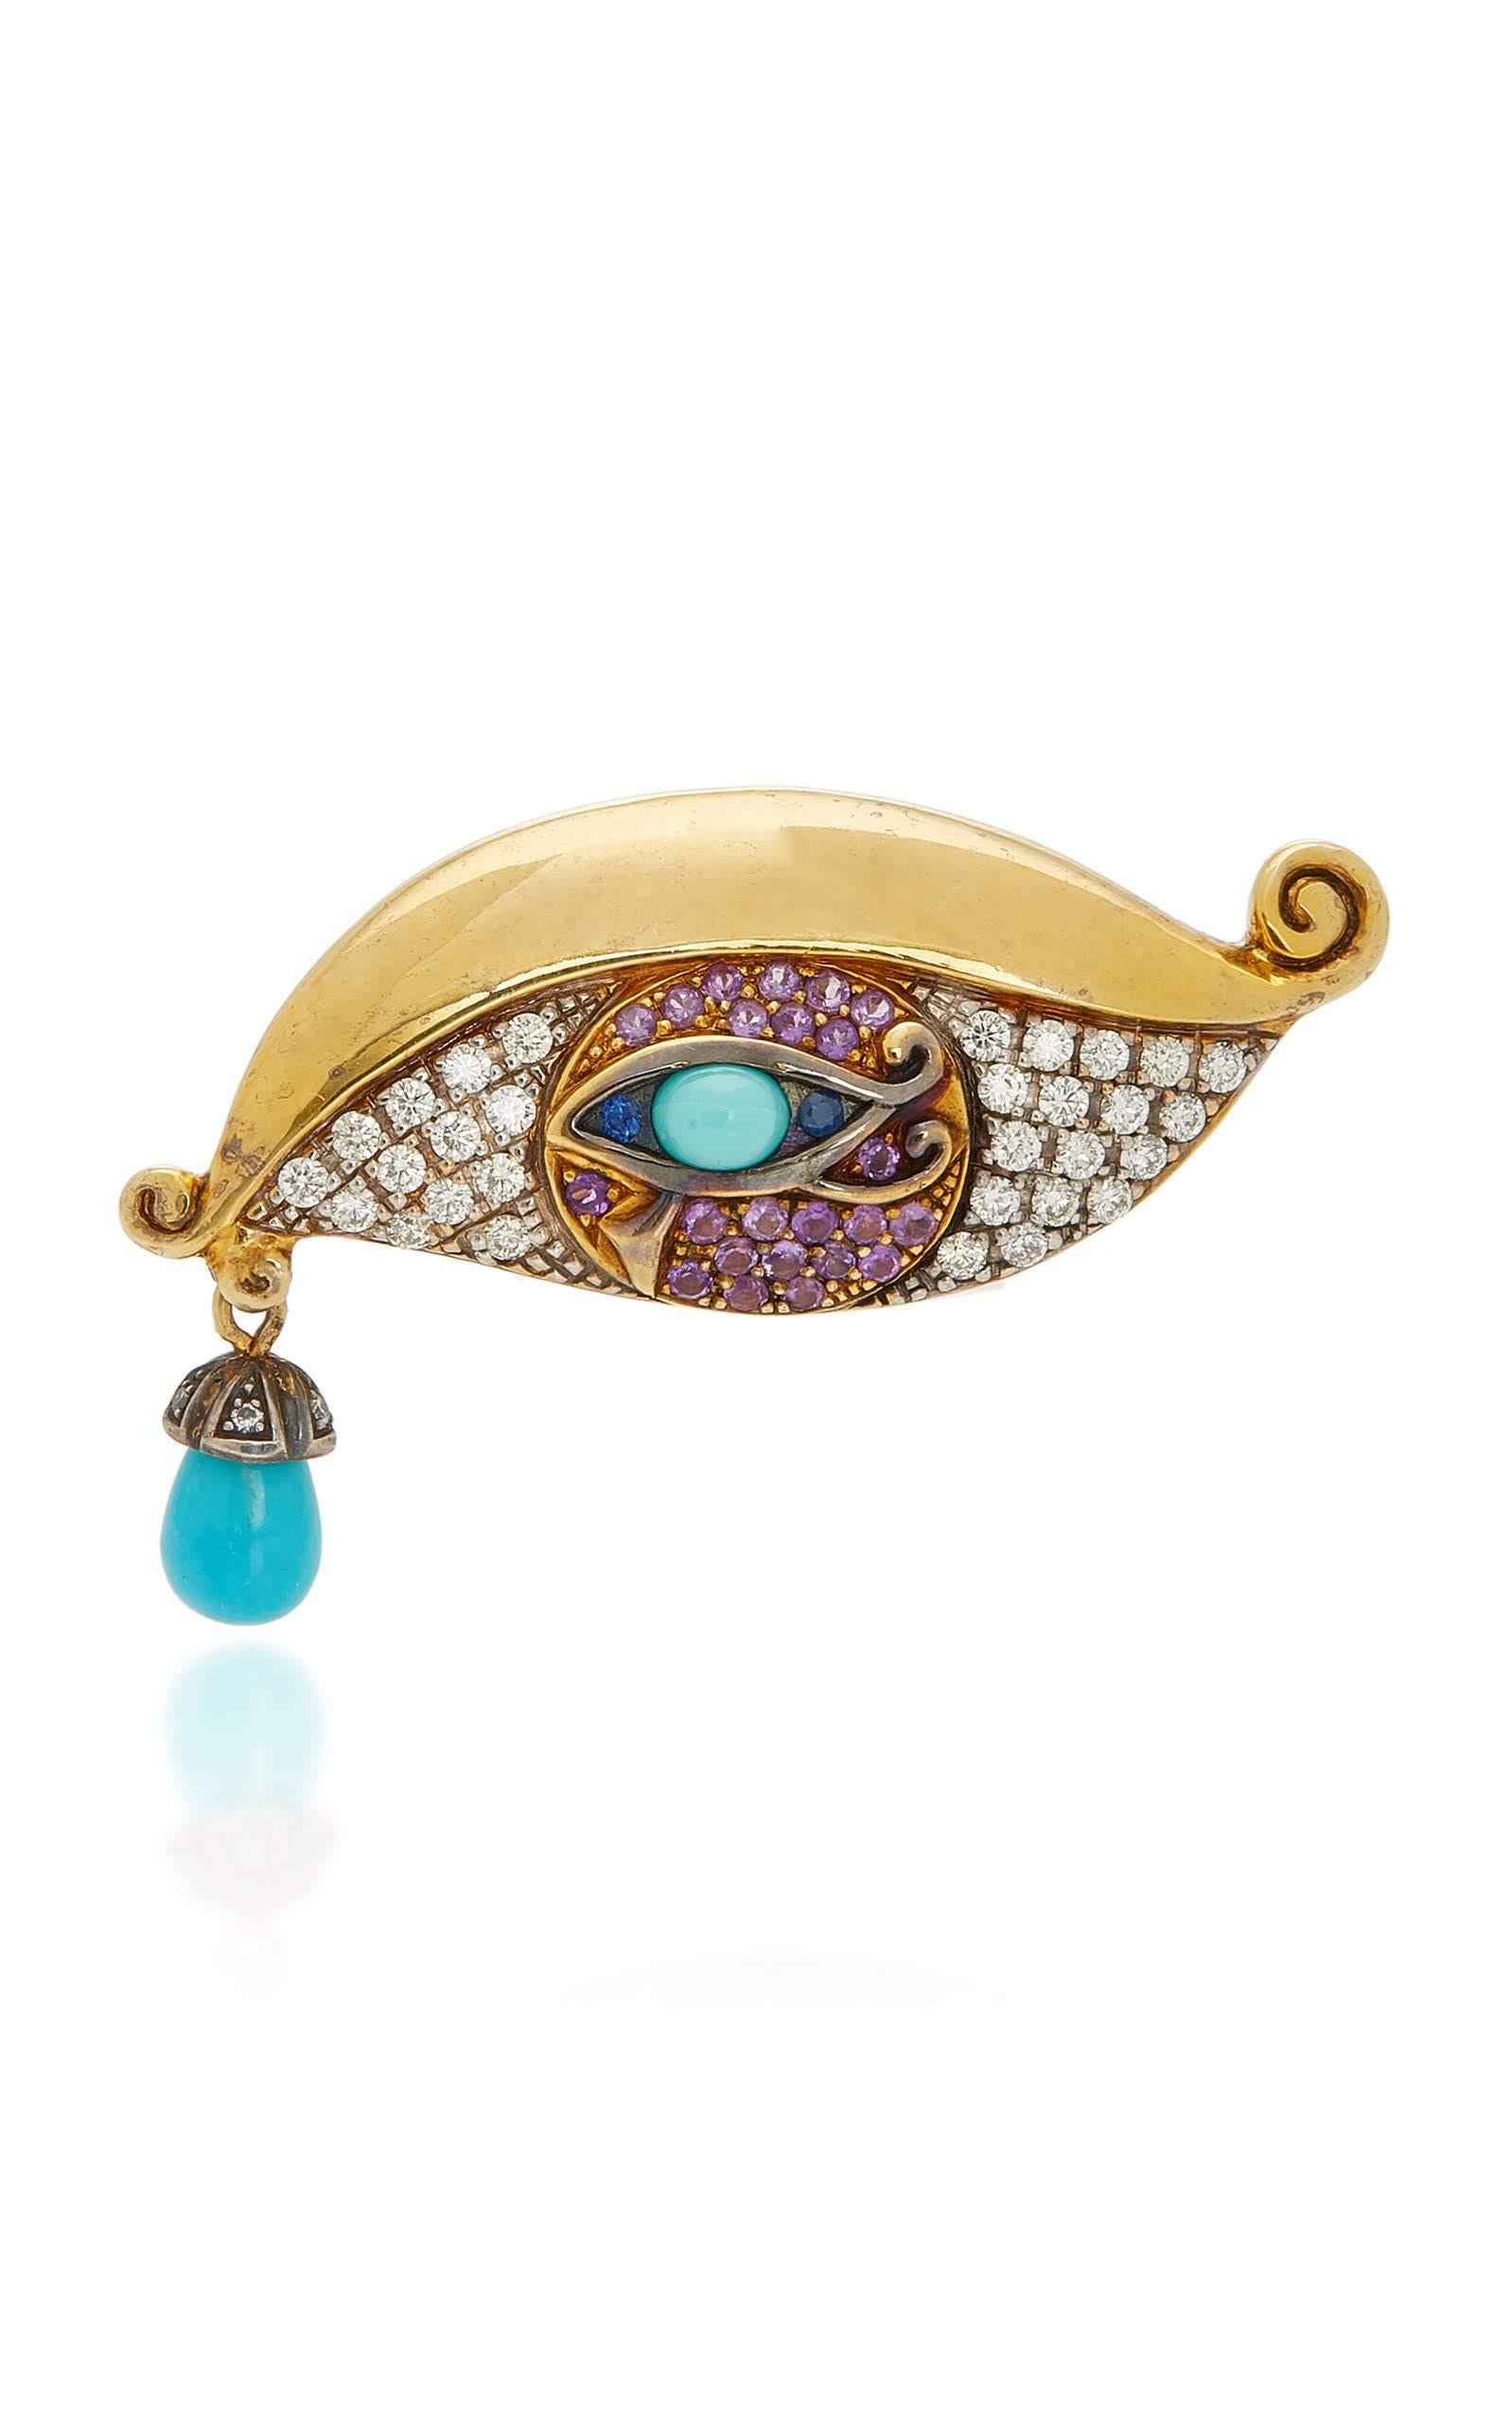 Limited edition of an eye ring in yellow 750/1000 (18K) gold and vermeil by Sylvie Corbelin. A turquoise is set as a moving tear in the corner of the eye. The turquoise is partly covered with a cap and diamonds.
You can see the 